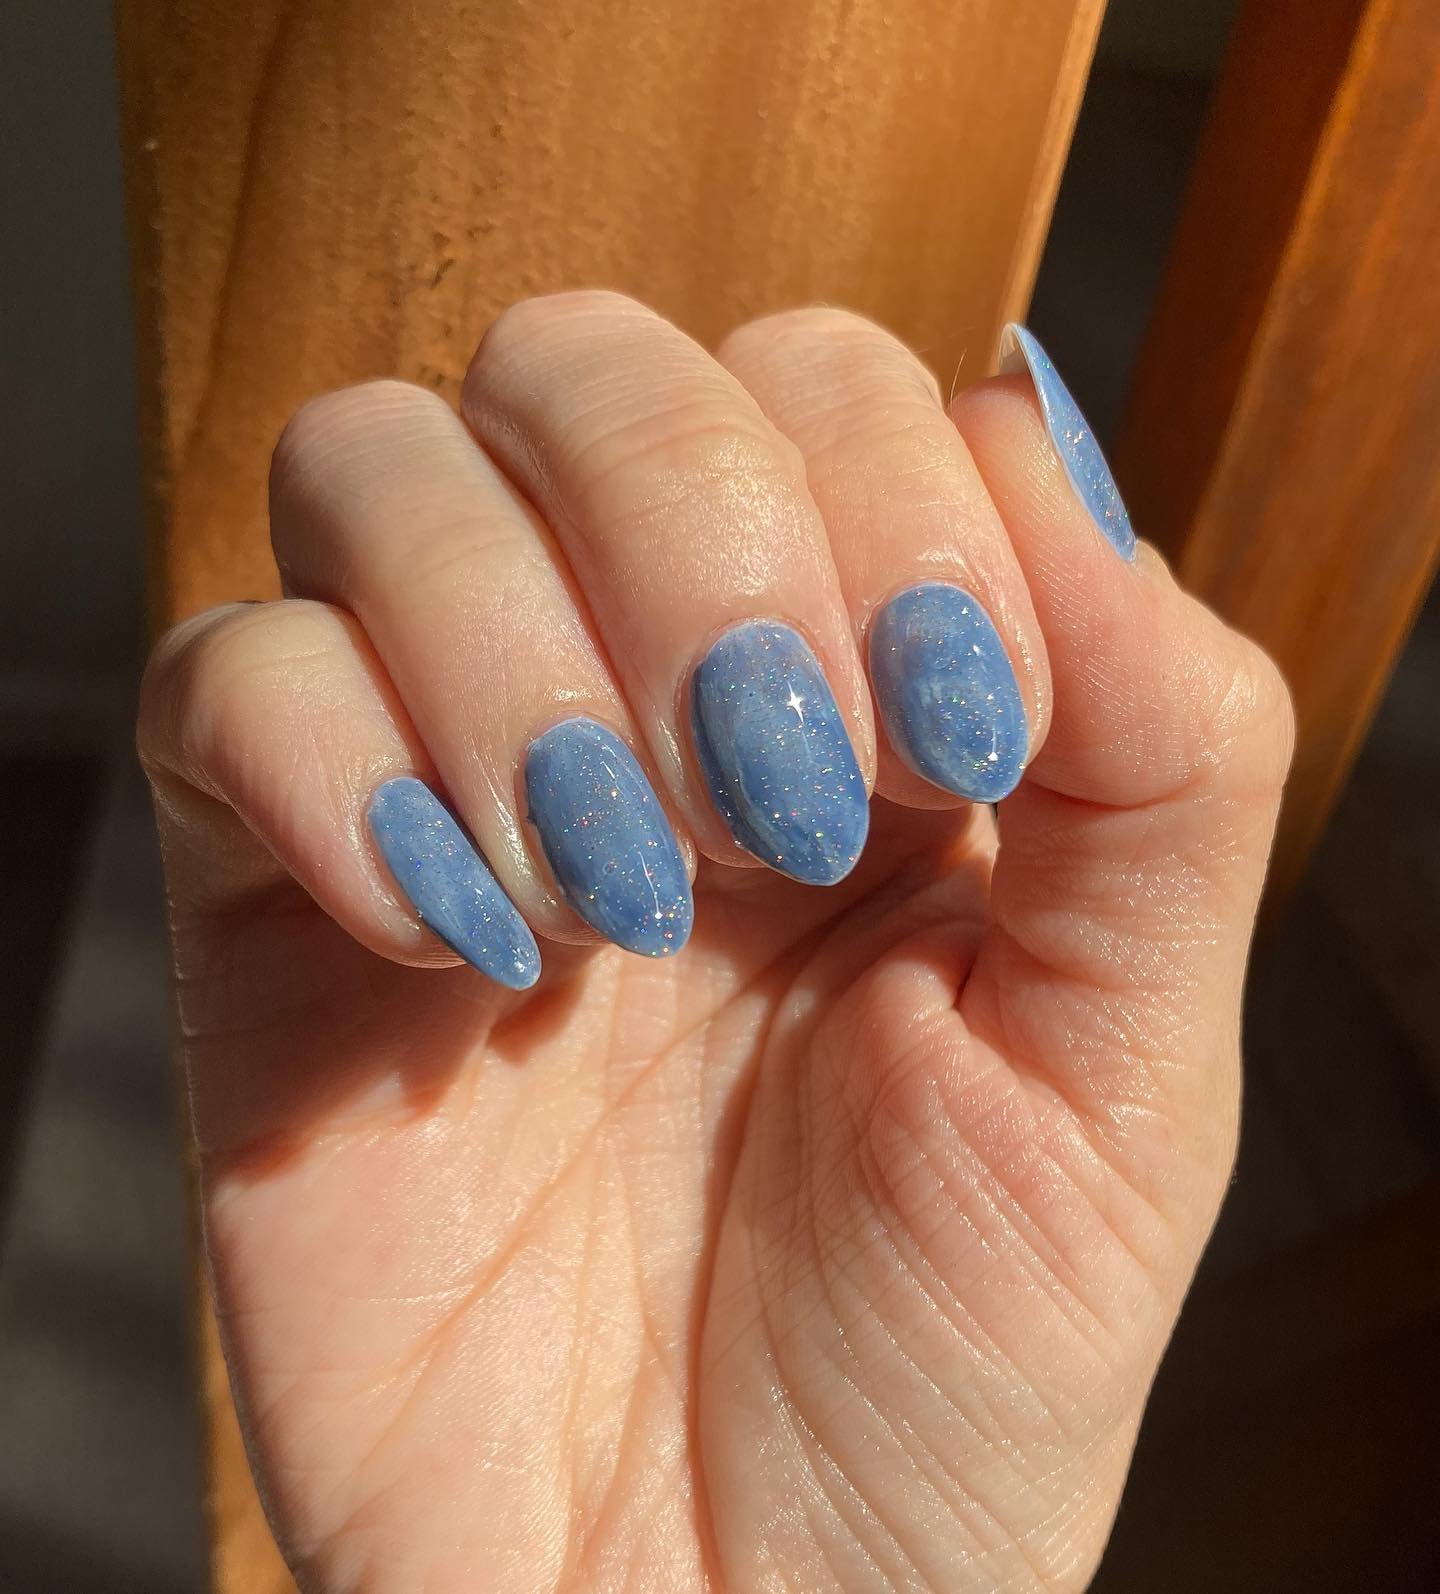 15 - Picture of Denim Nails